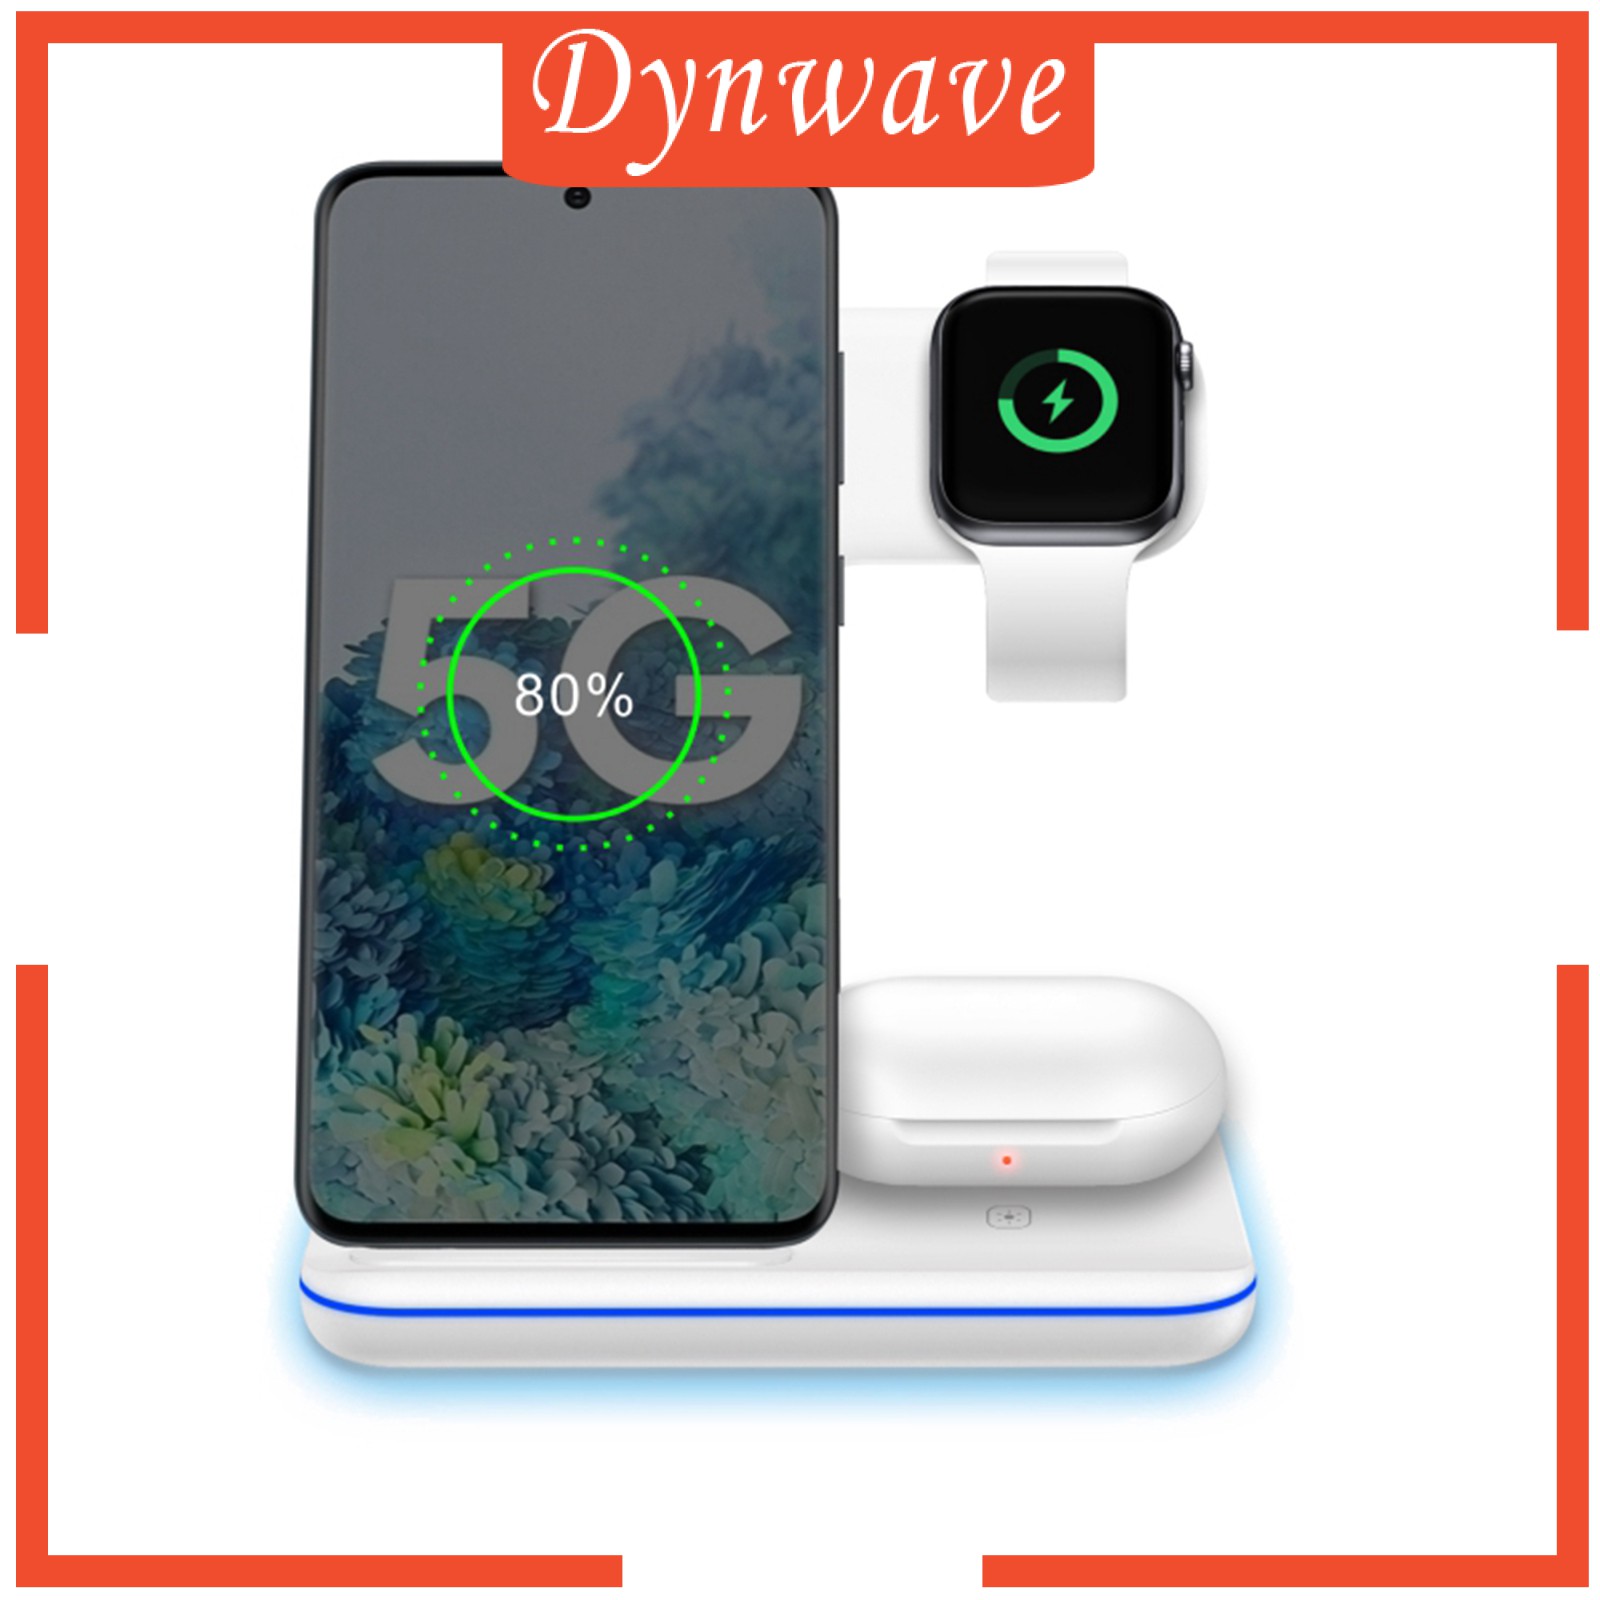 [DYNWAVE] 3 in 1 15W Wireless Fast Charging Station Charger Dock Stand for iPhone